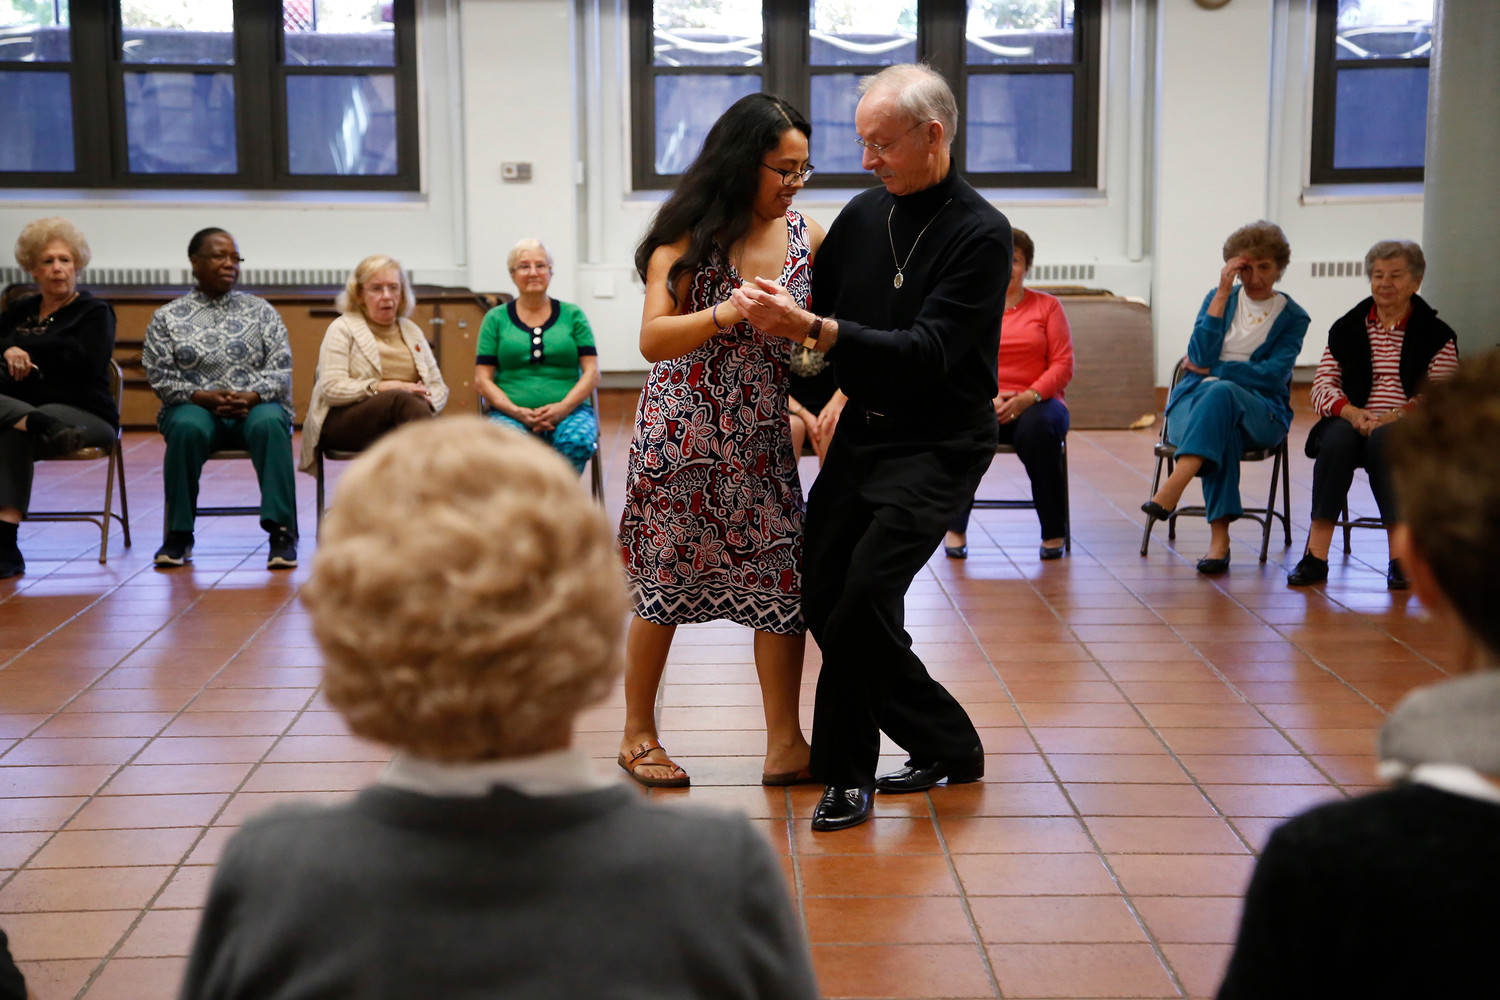 Ferrara and dance partner Nicole Almario demonstrated salsa techniques for the New and Vibrant Over 50s Club.